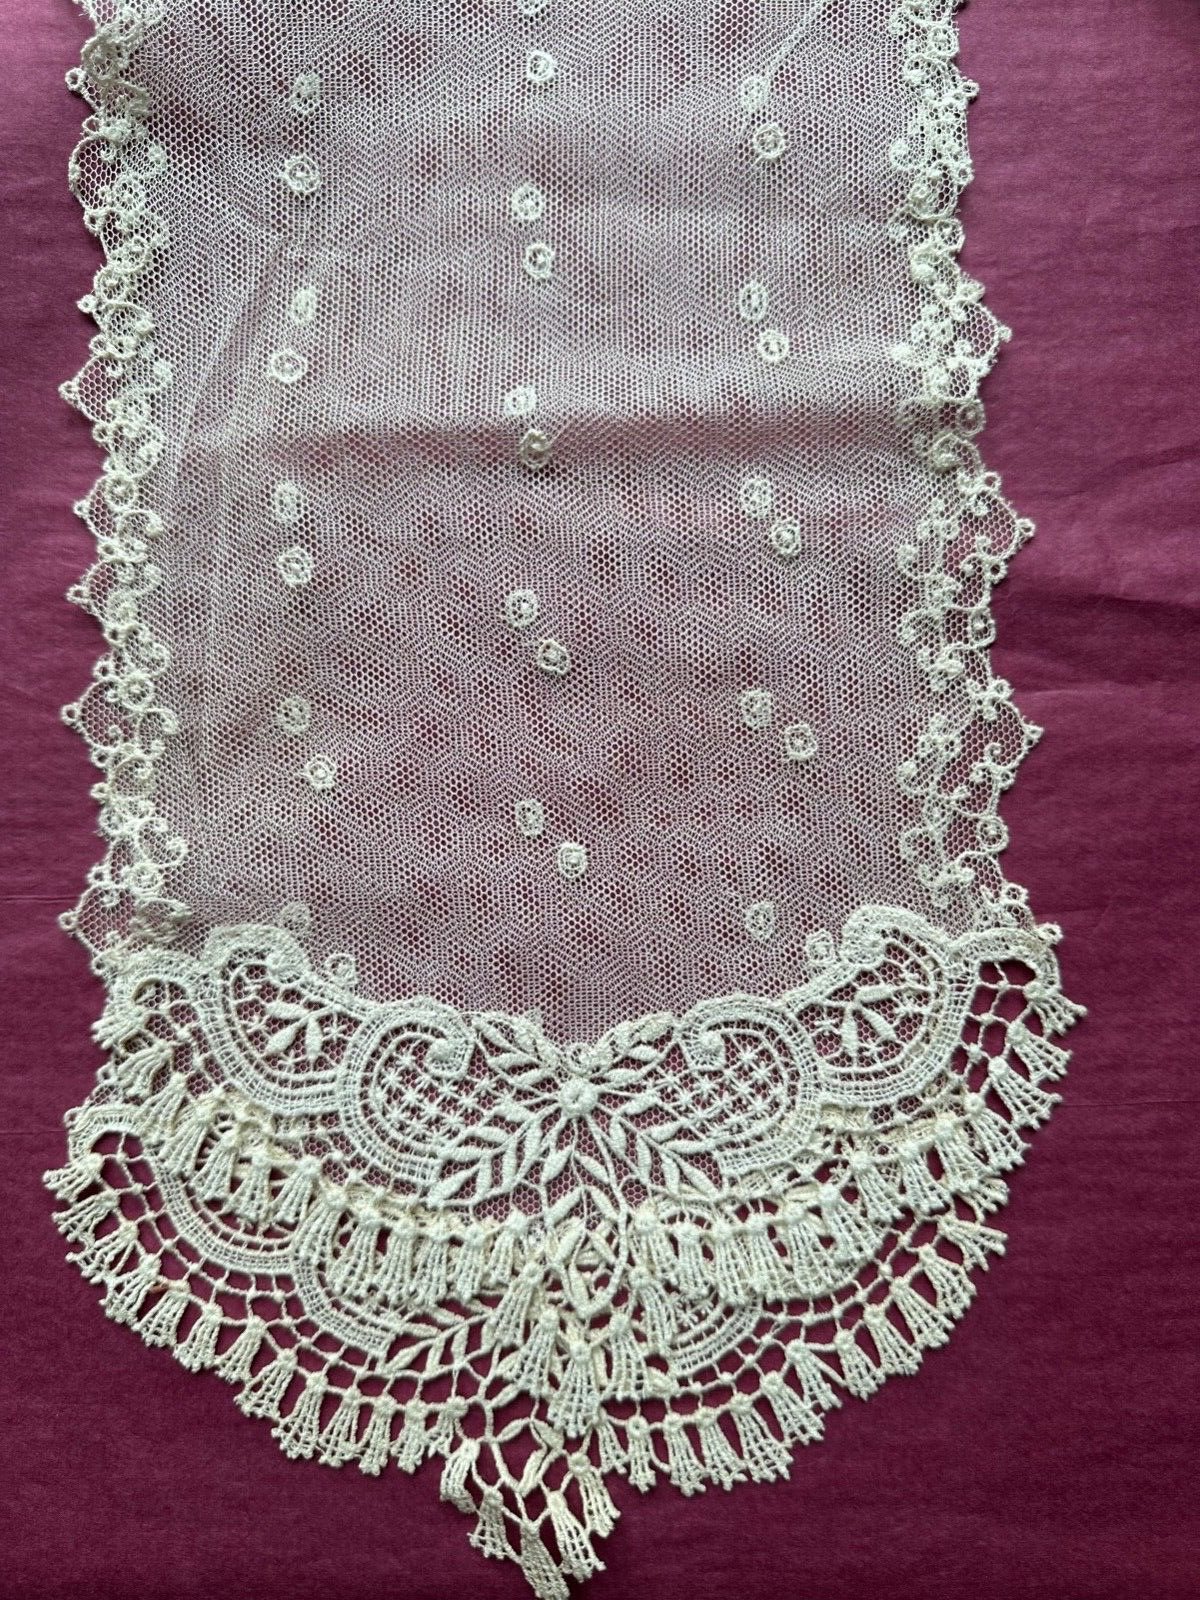 Superb Antique French Edwardian Lace Stole -Silk Tulle embroidered 157cm by 16cm